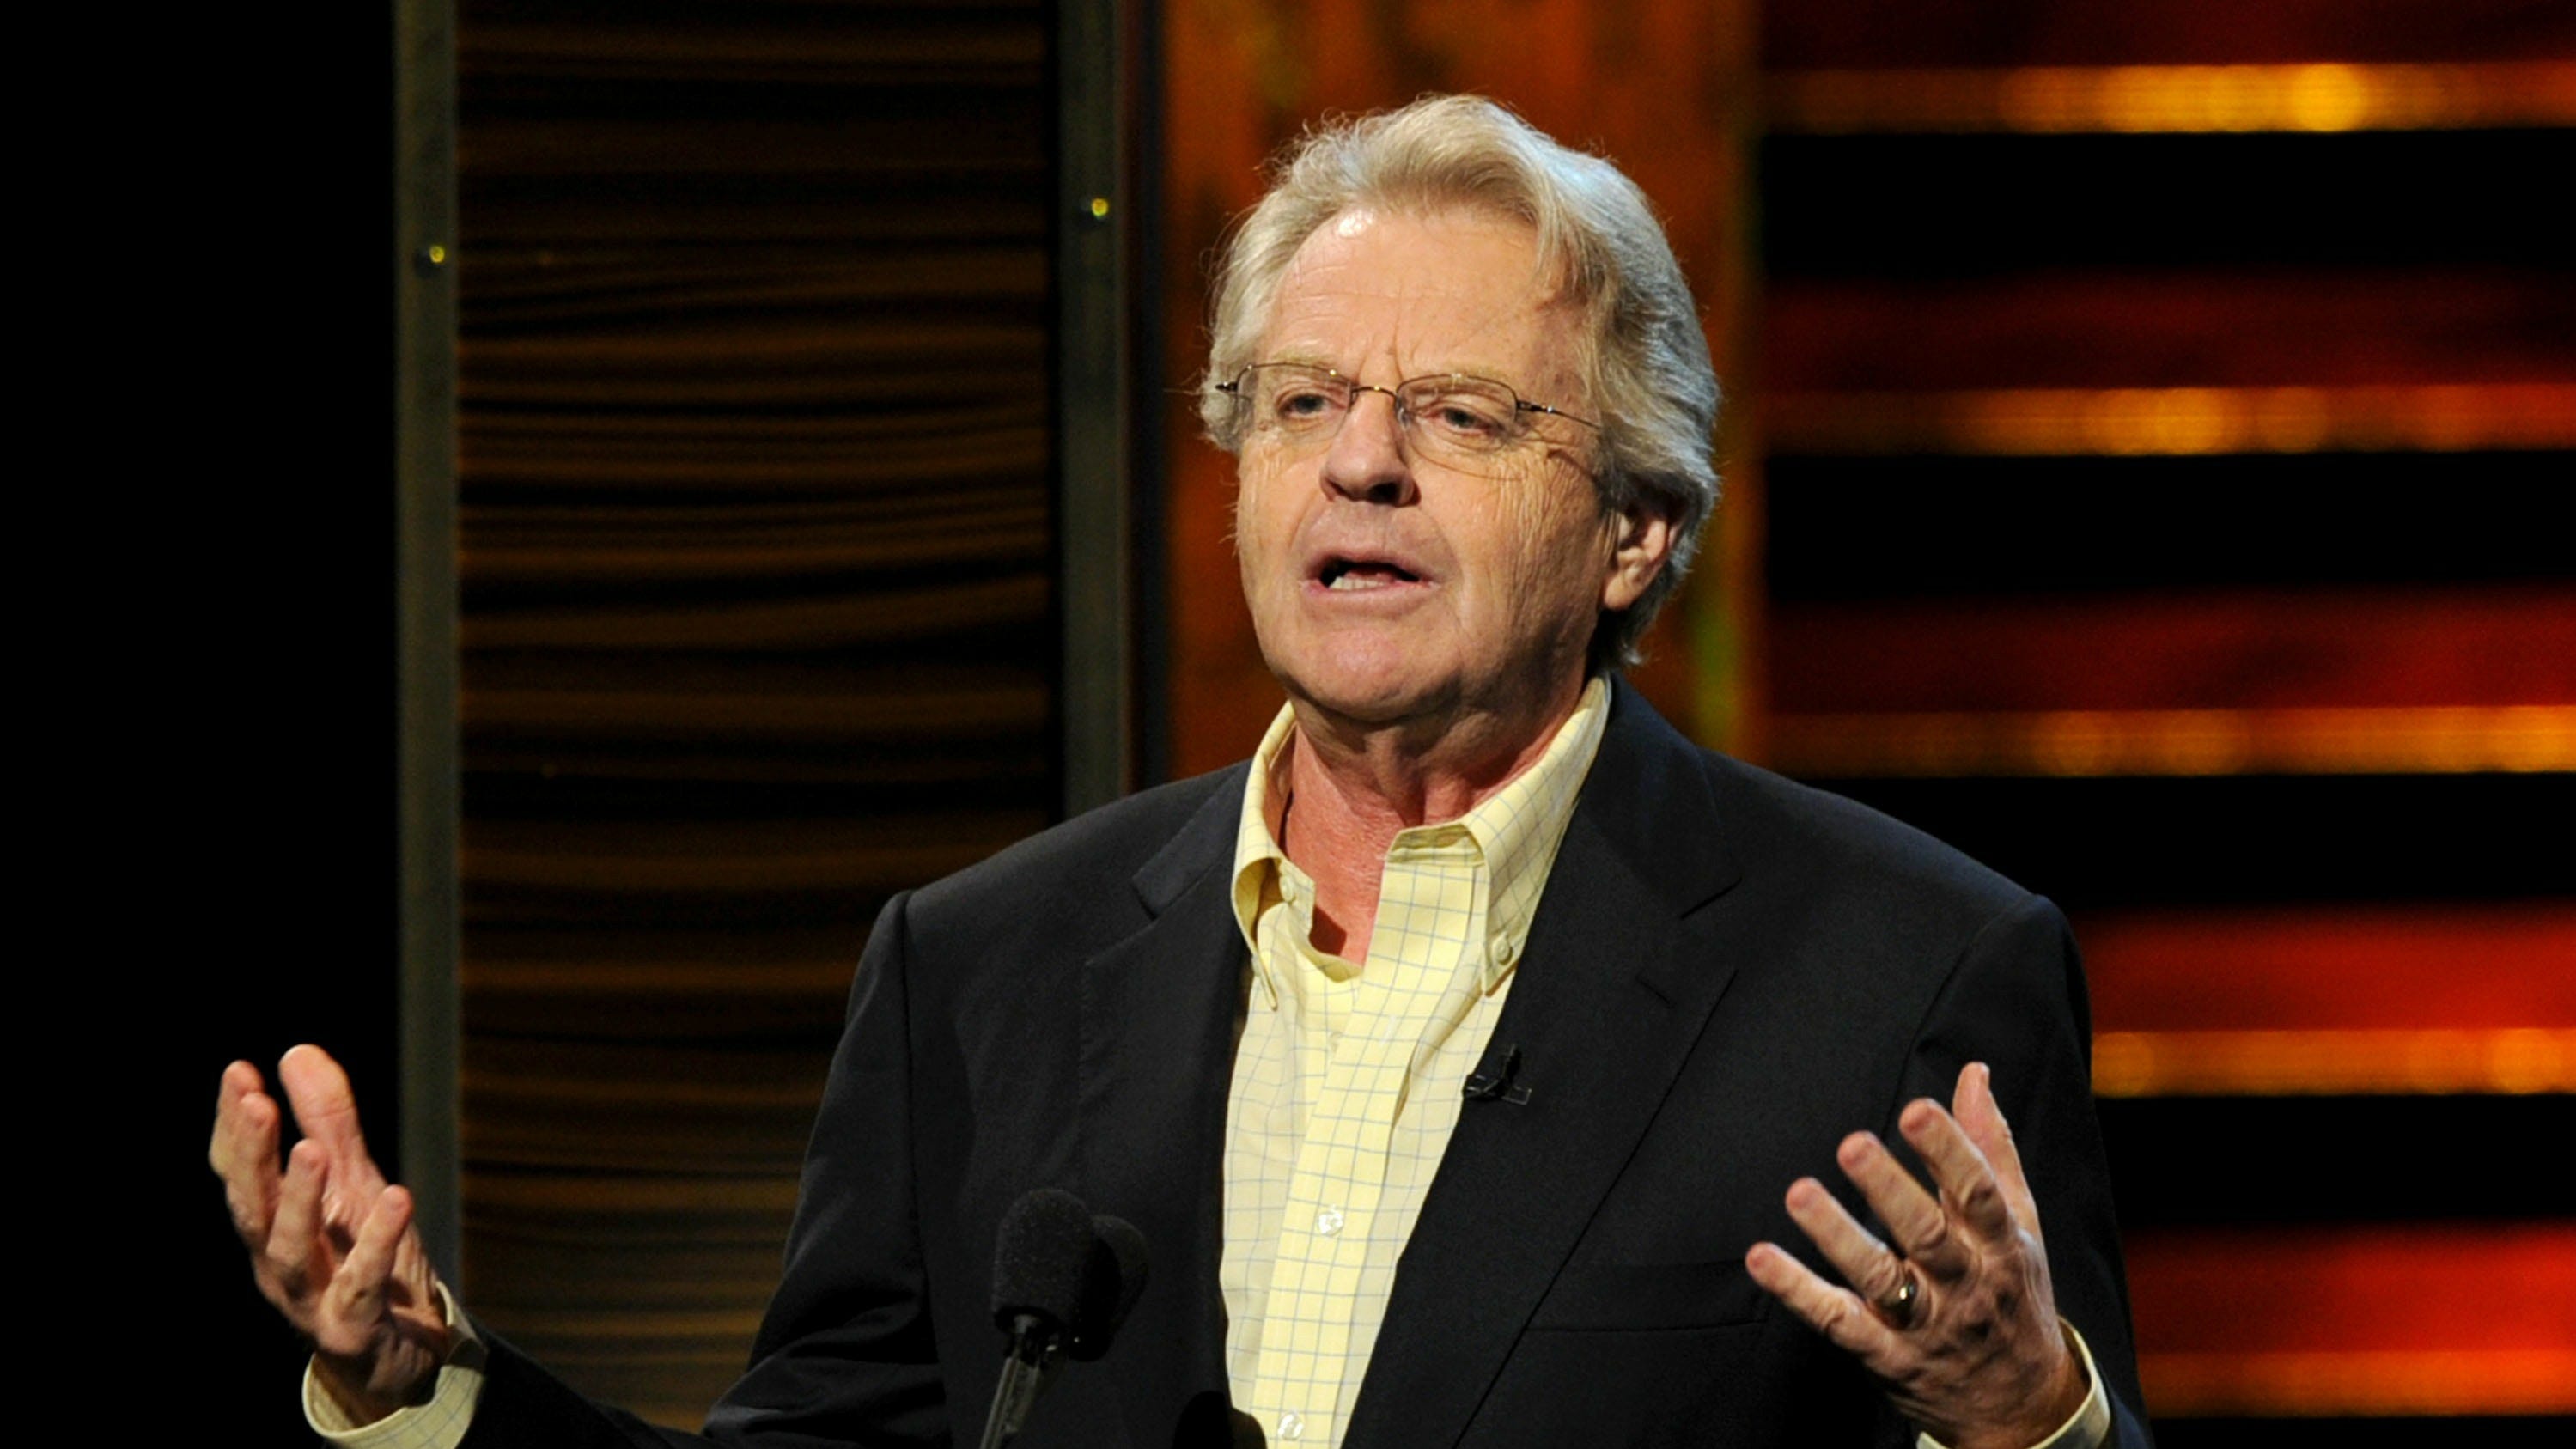 Talk show host Jerry Springer speaks onstage at the Comedy Central Roast Of David Hasselhoff on August 1, 2010 in Culver City, California.